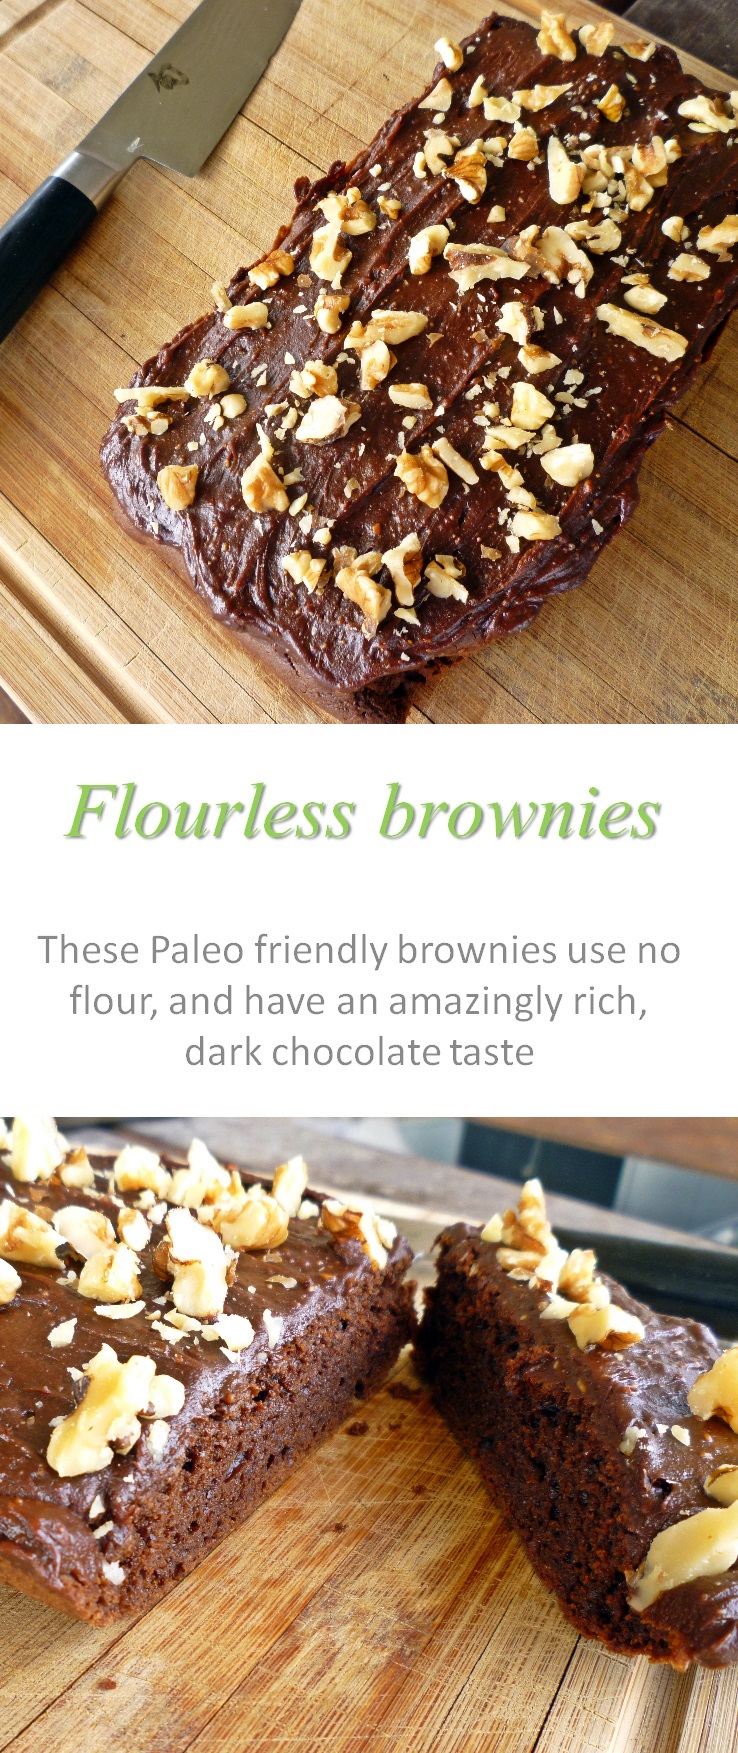 Dairy-free, gluten-free, and Paleo-friendly flourless brownies with a real dark-chocolate taste. #brownies